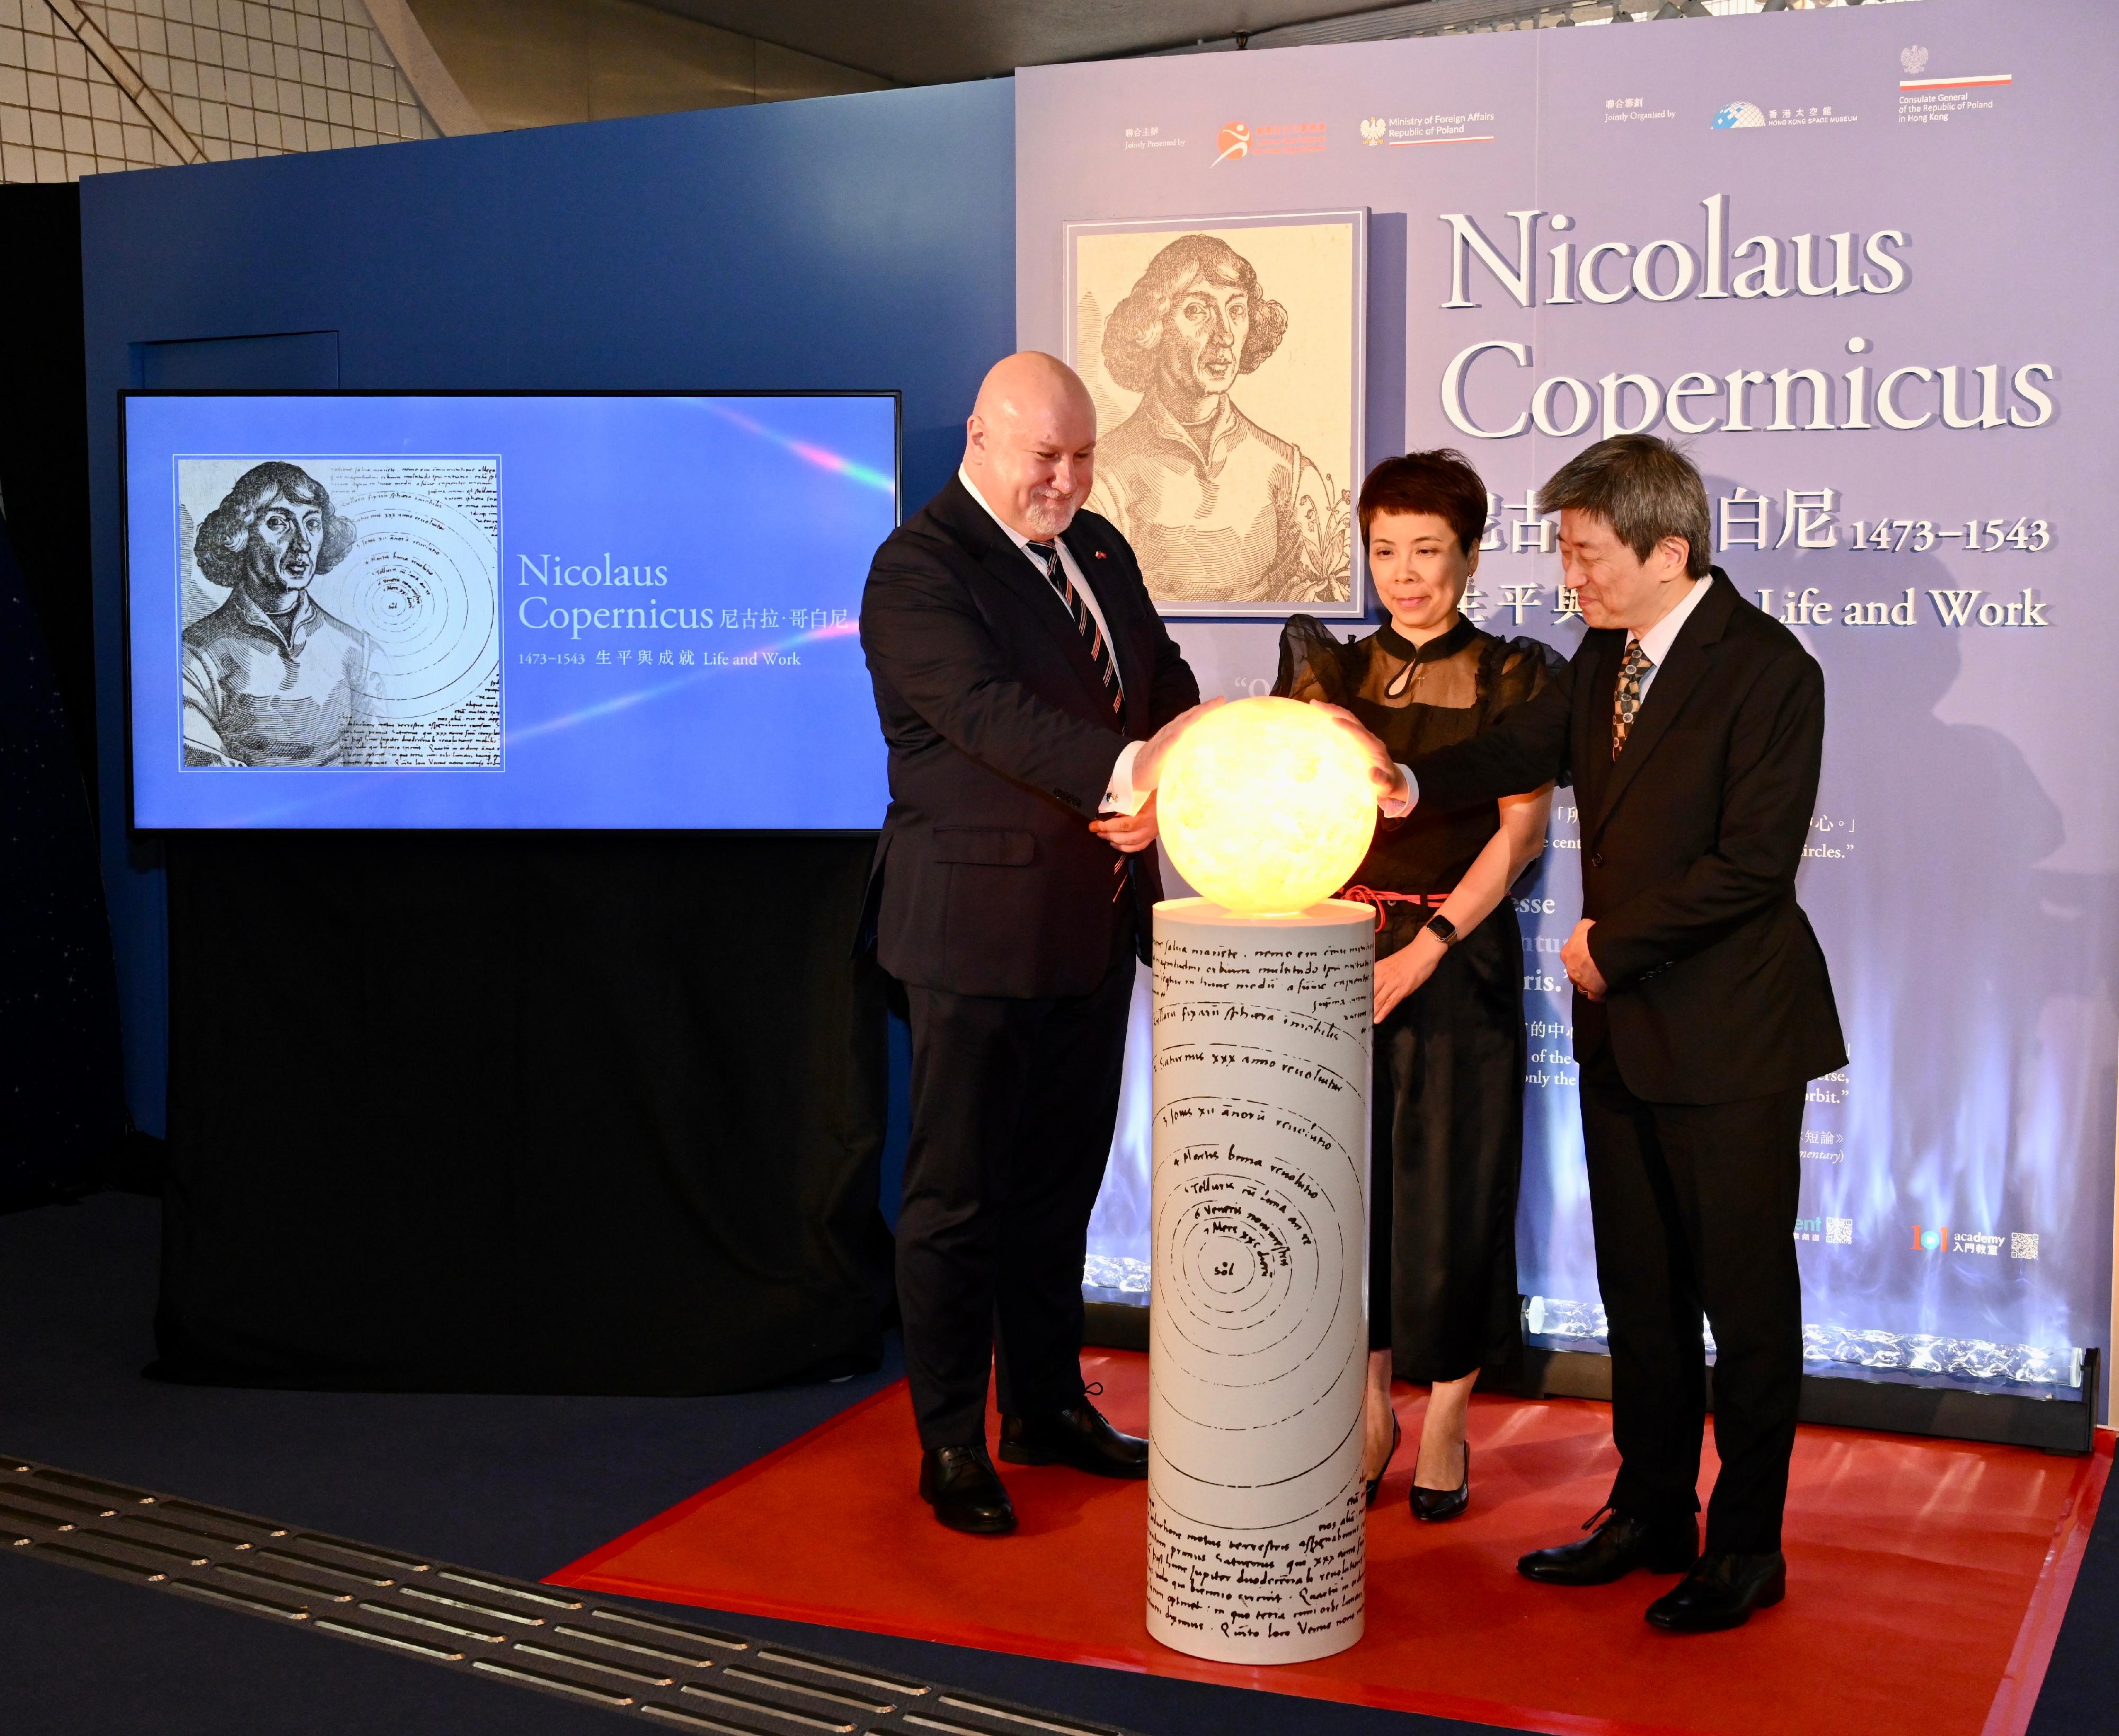 The opening ceremony for the special exhibition "Nicolaus Copernicus: Life and Work" was held today (June 20) at the Hong Kong Space Museum. Photo shows (from left) the Consul General of the Republic of Poland in Hong Kong, Dr Aleksander Dańda; the Acting Director of Leisure and Cultural Services, Miss Eve Tam; and the Museum Director of the Hong Kong Science Museum, Mr Lawrence Lee, officiating at the ceremony.